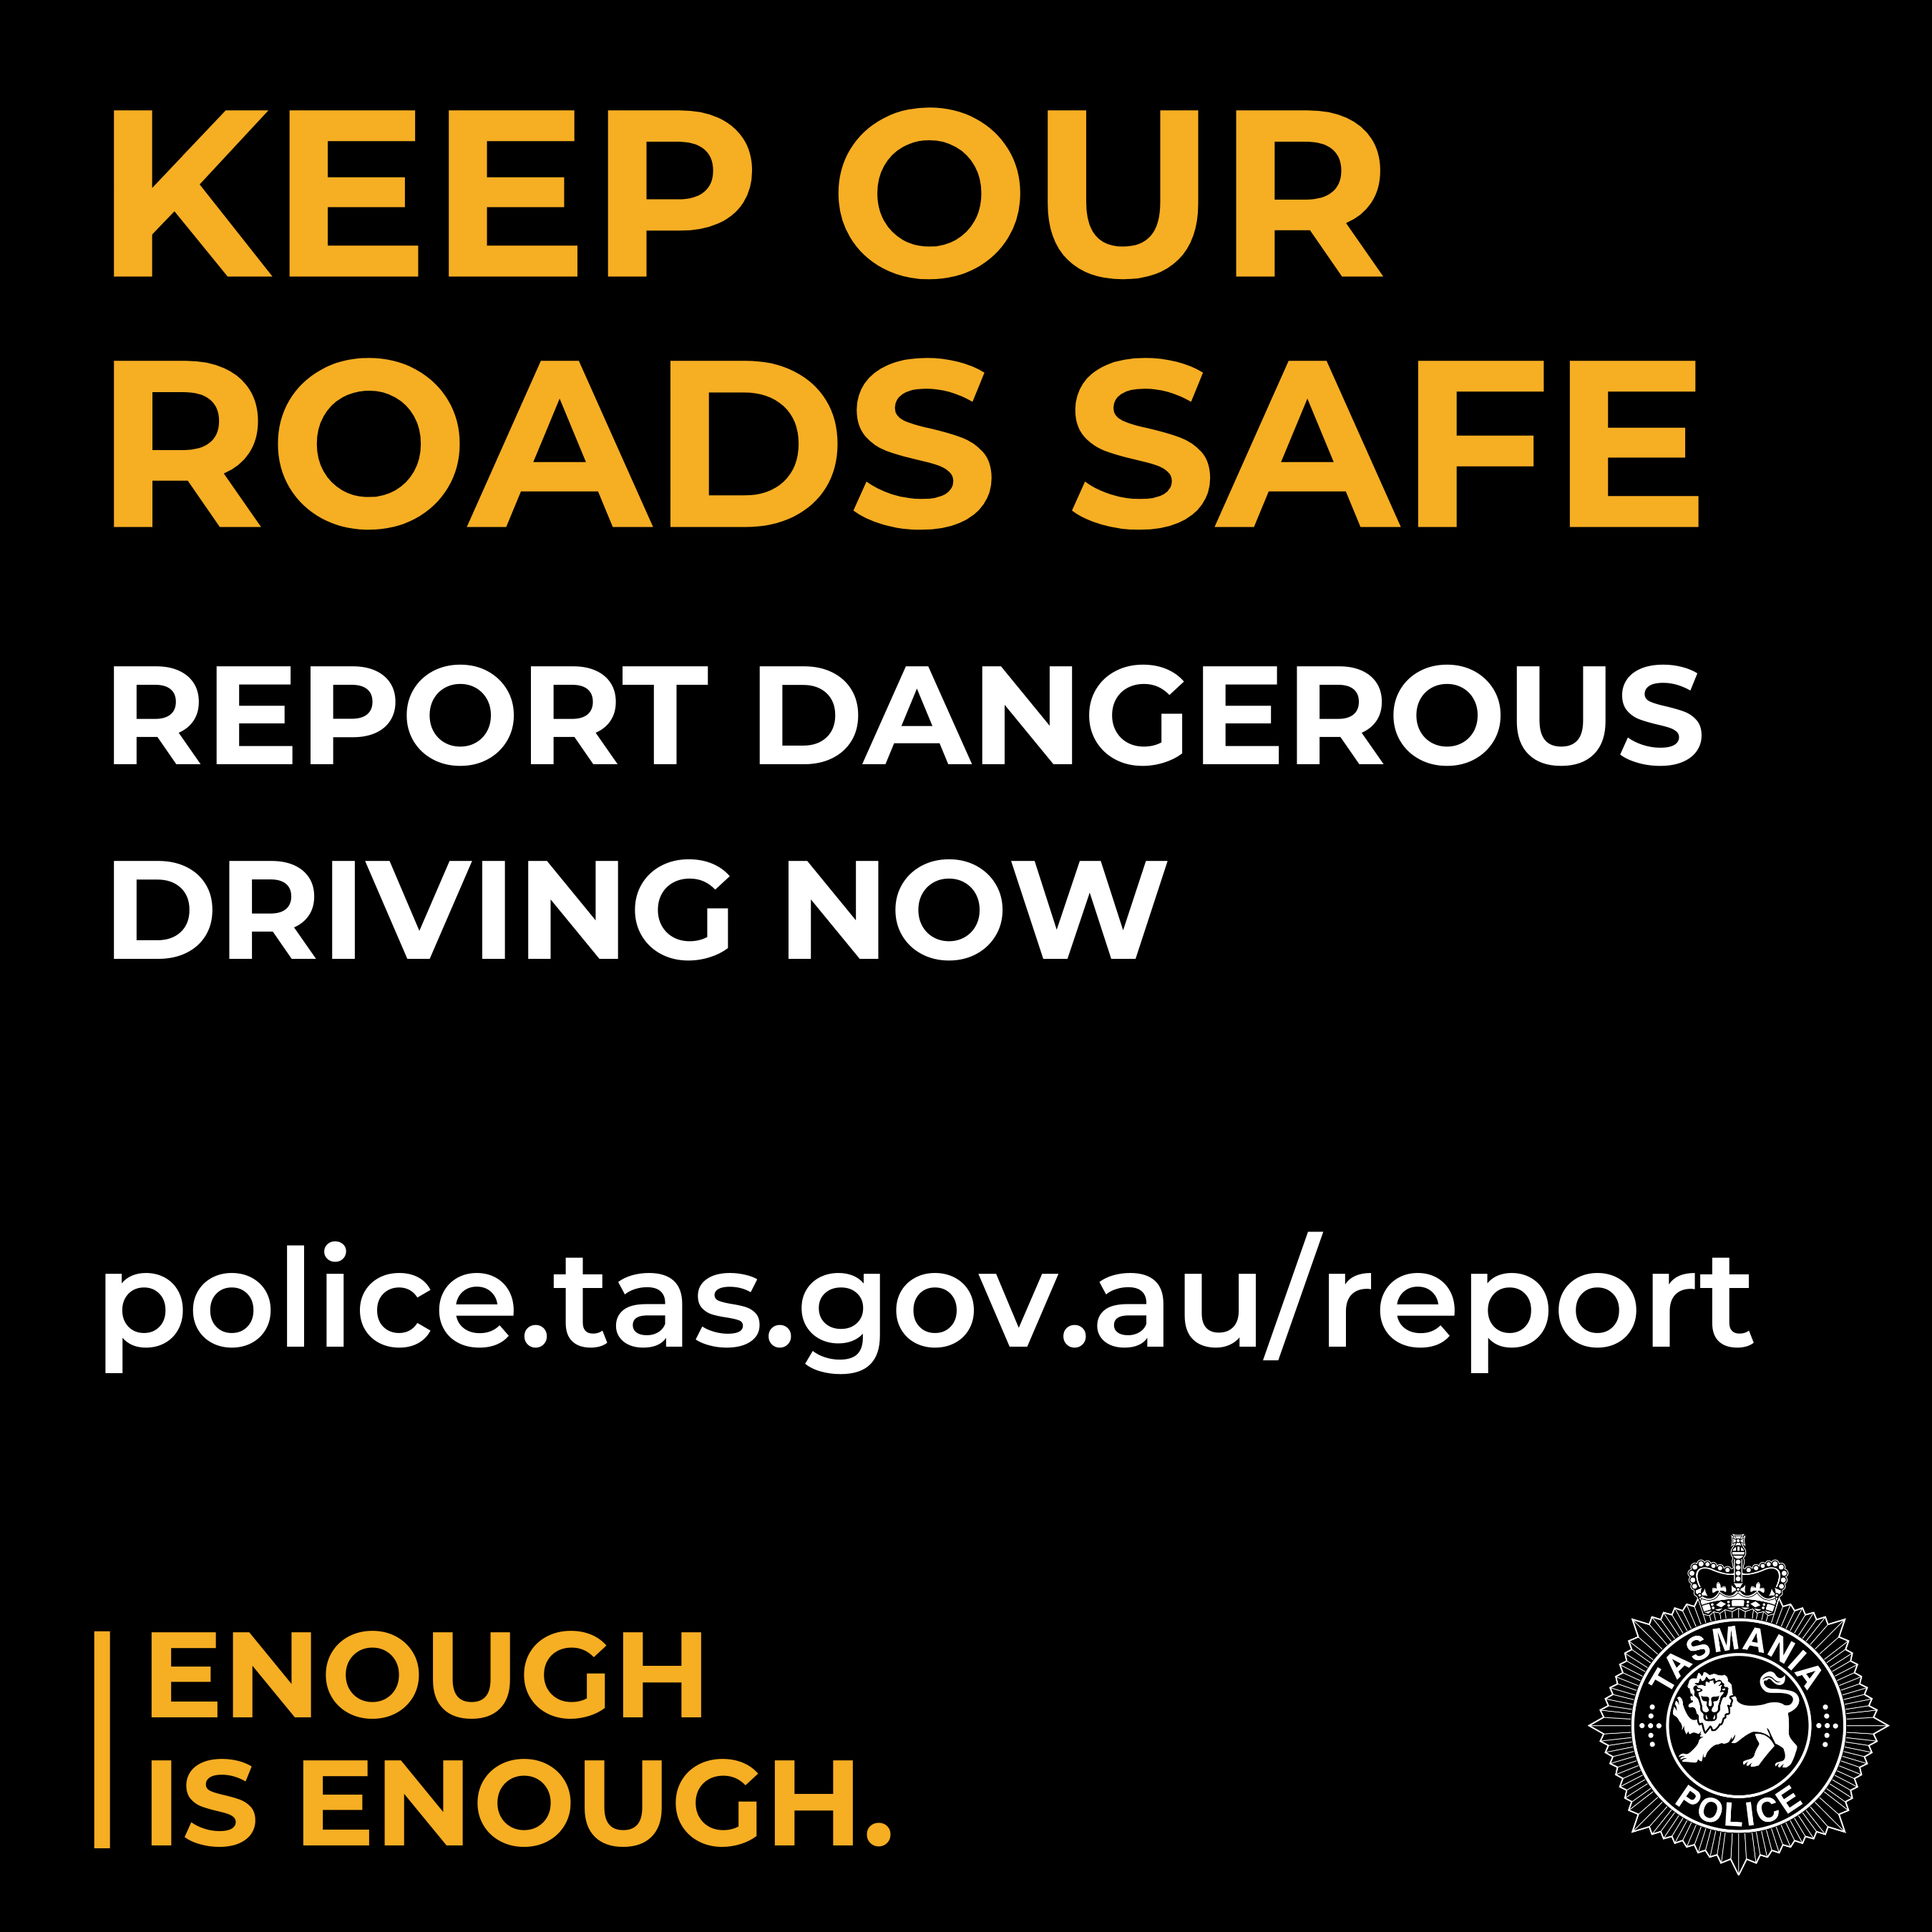 Keep our roads safe, report dangerous driving now.